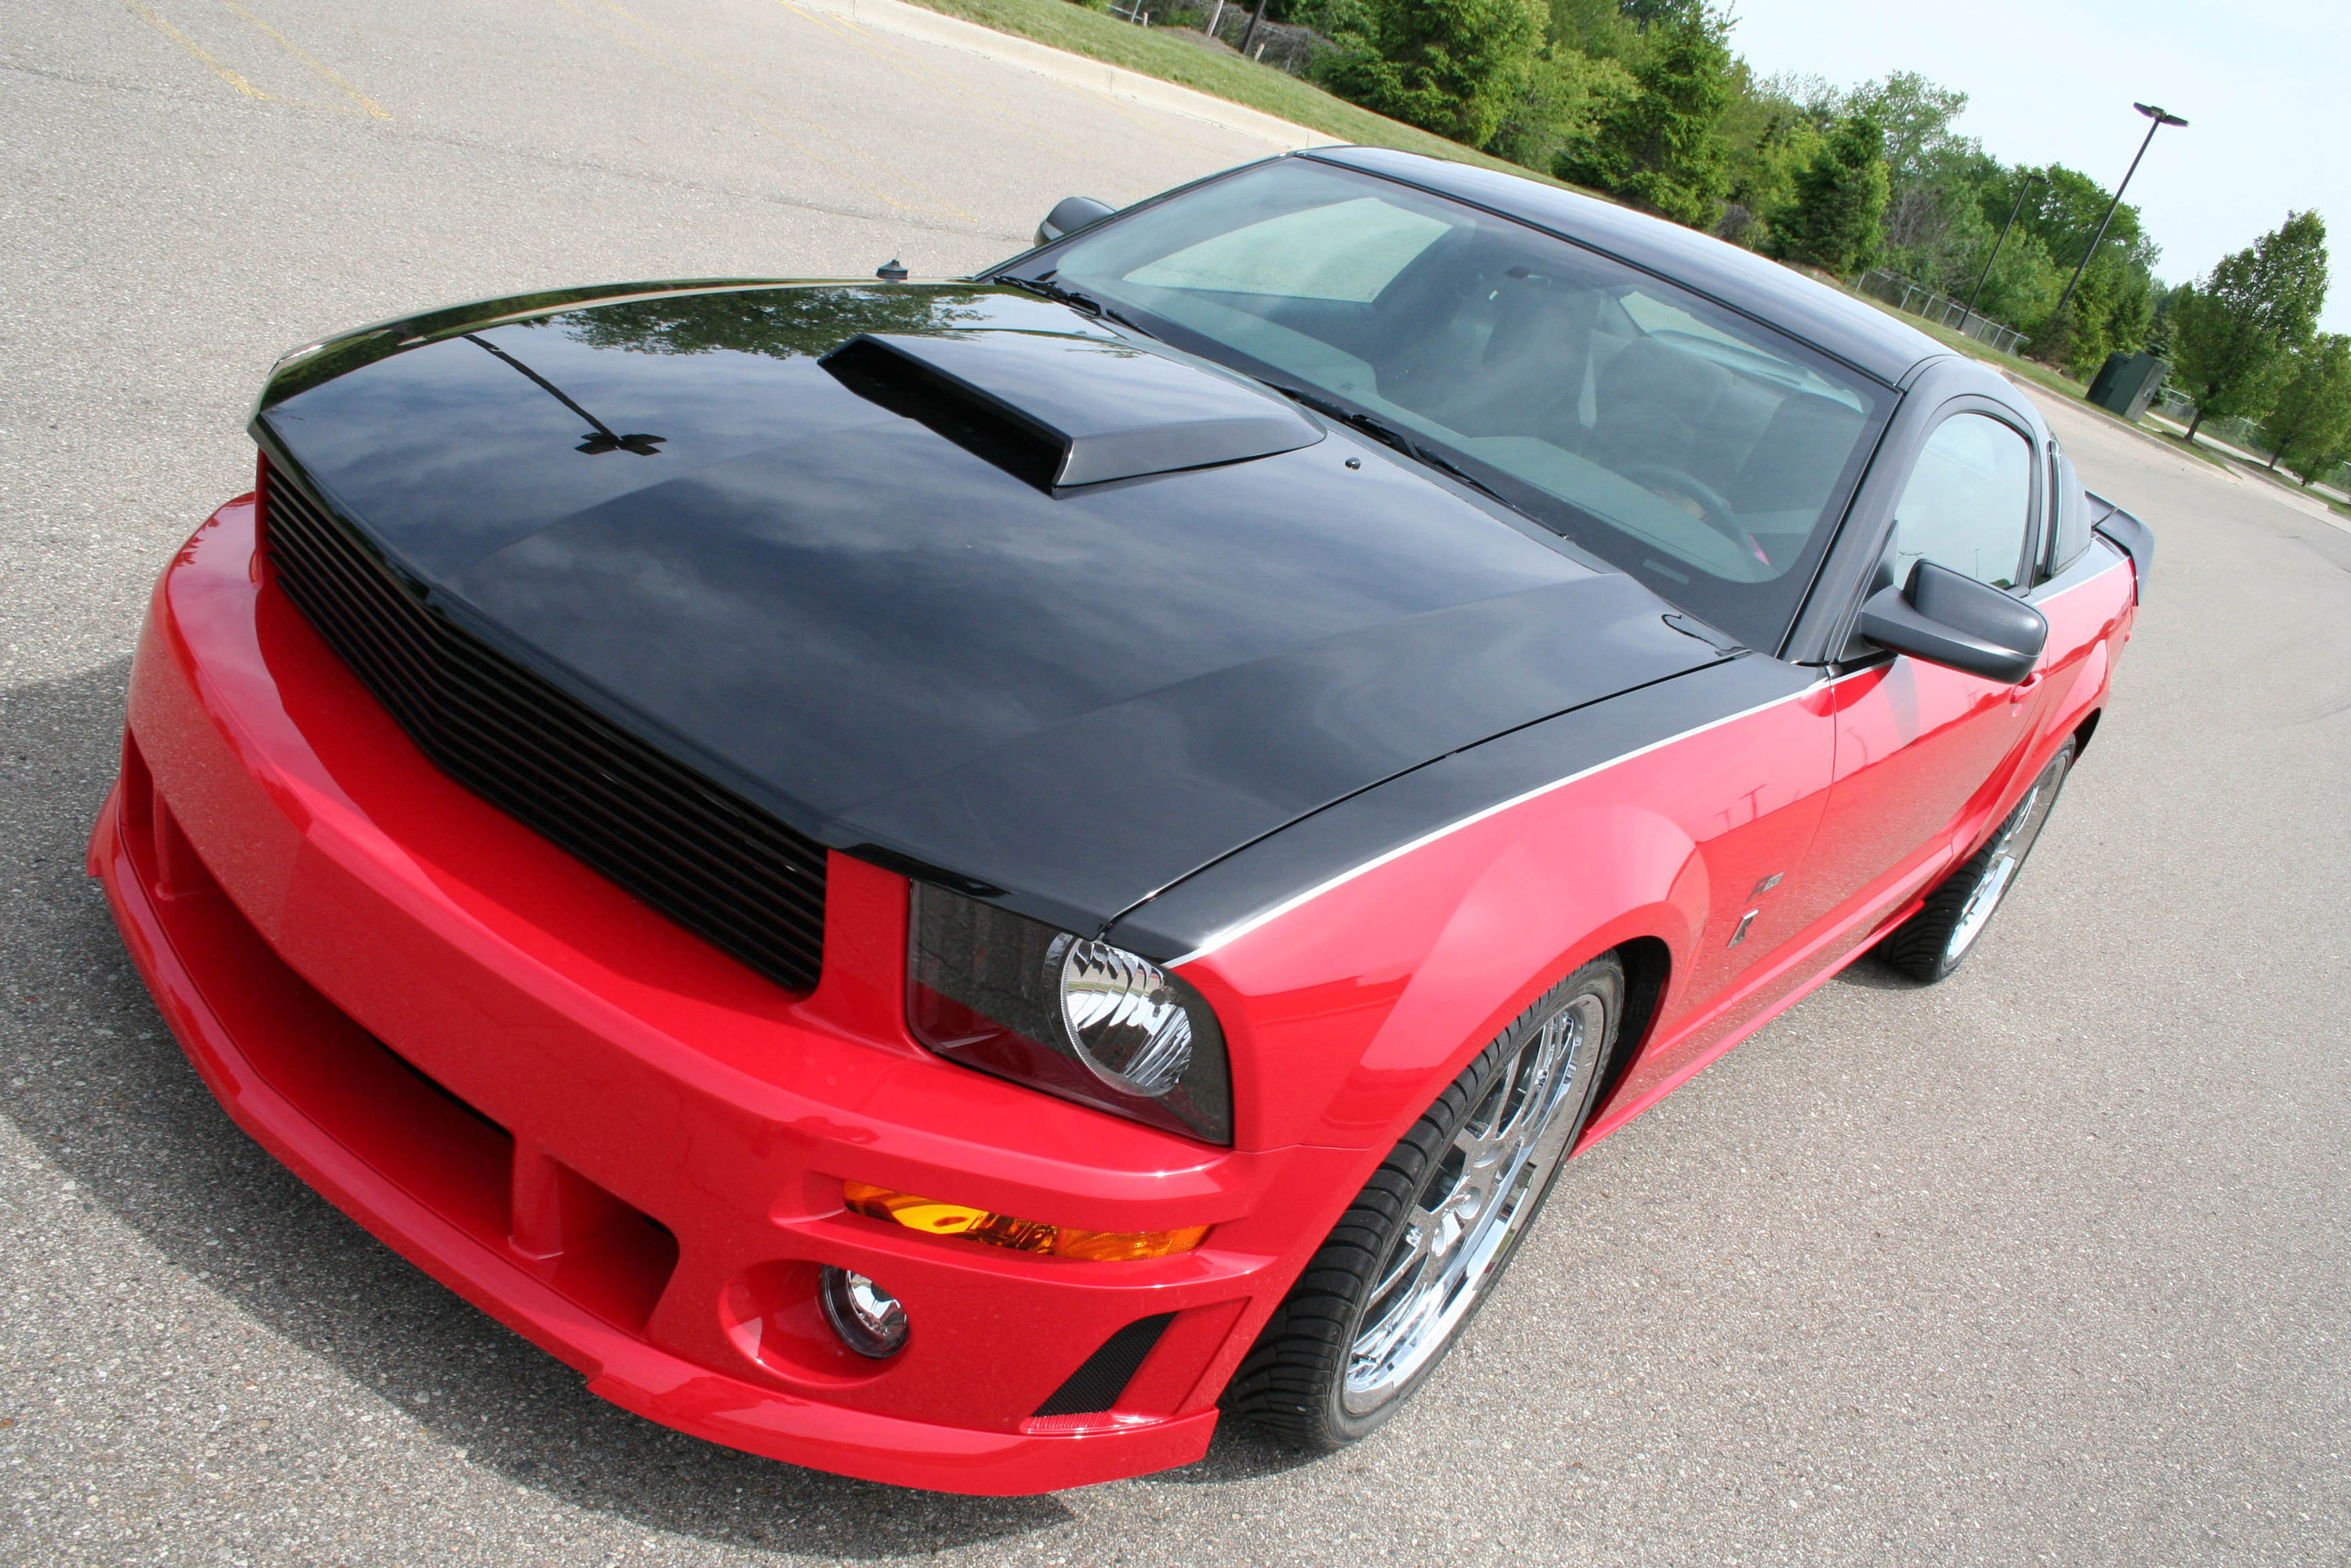 ROUSH RTC Ford Mustang